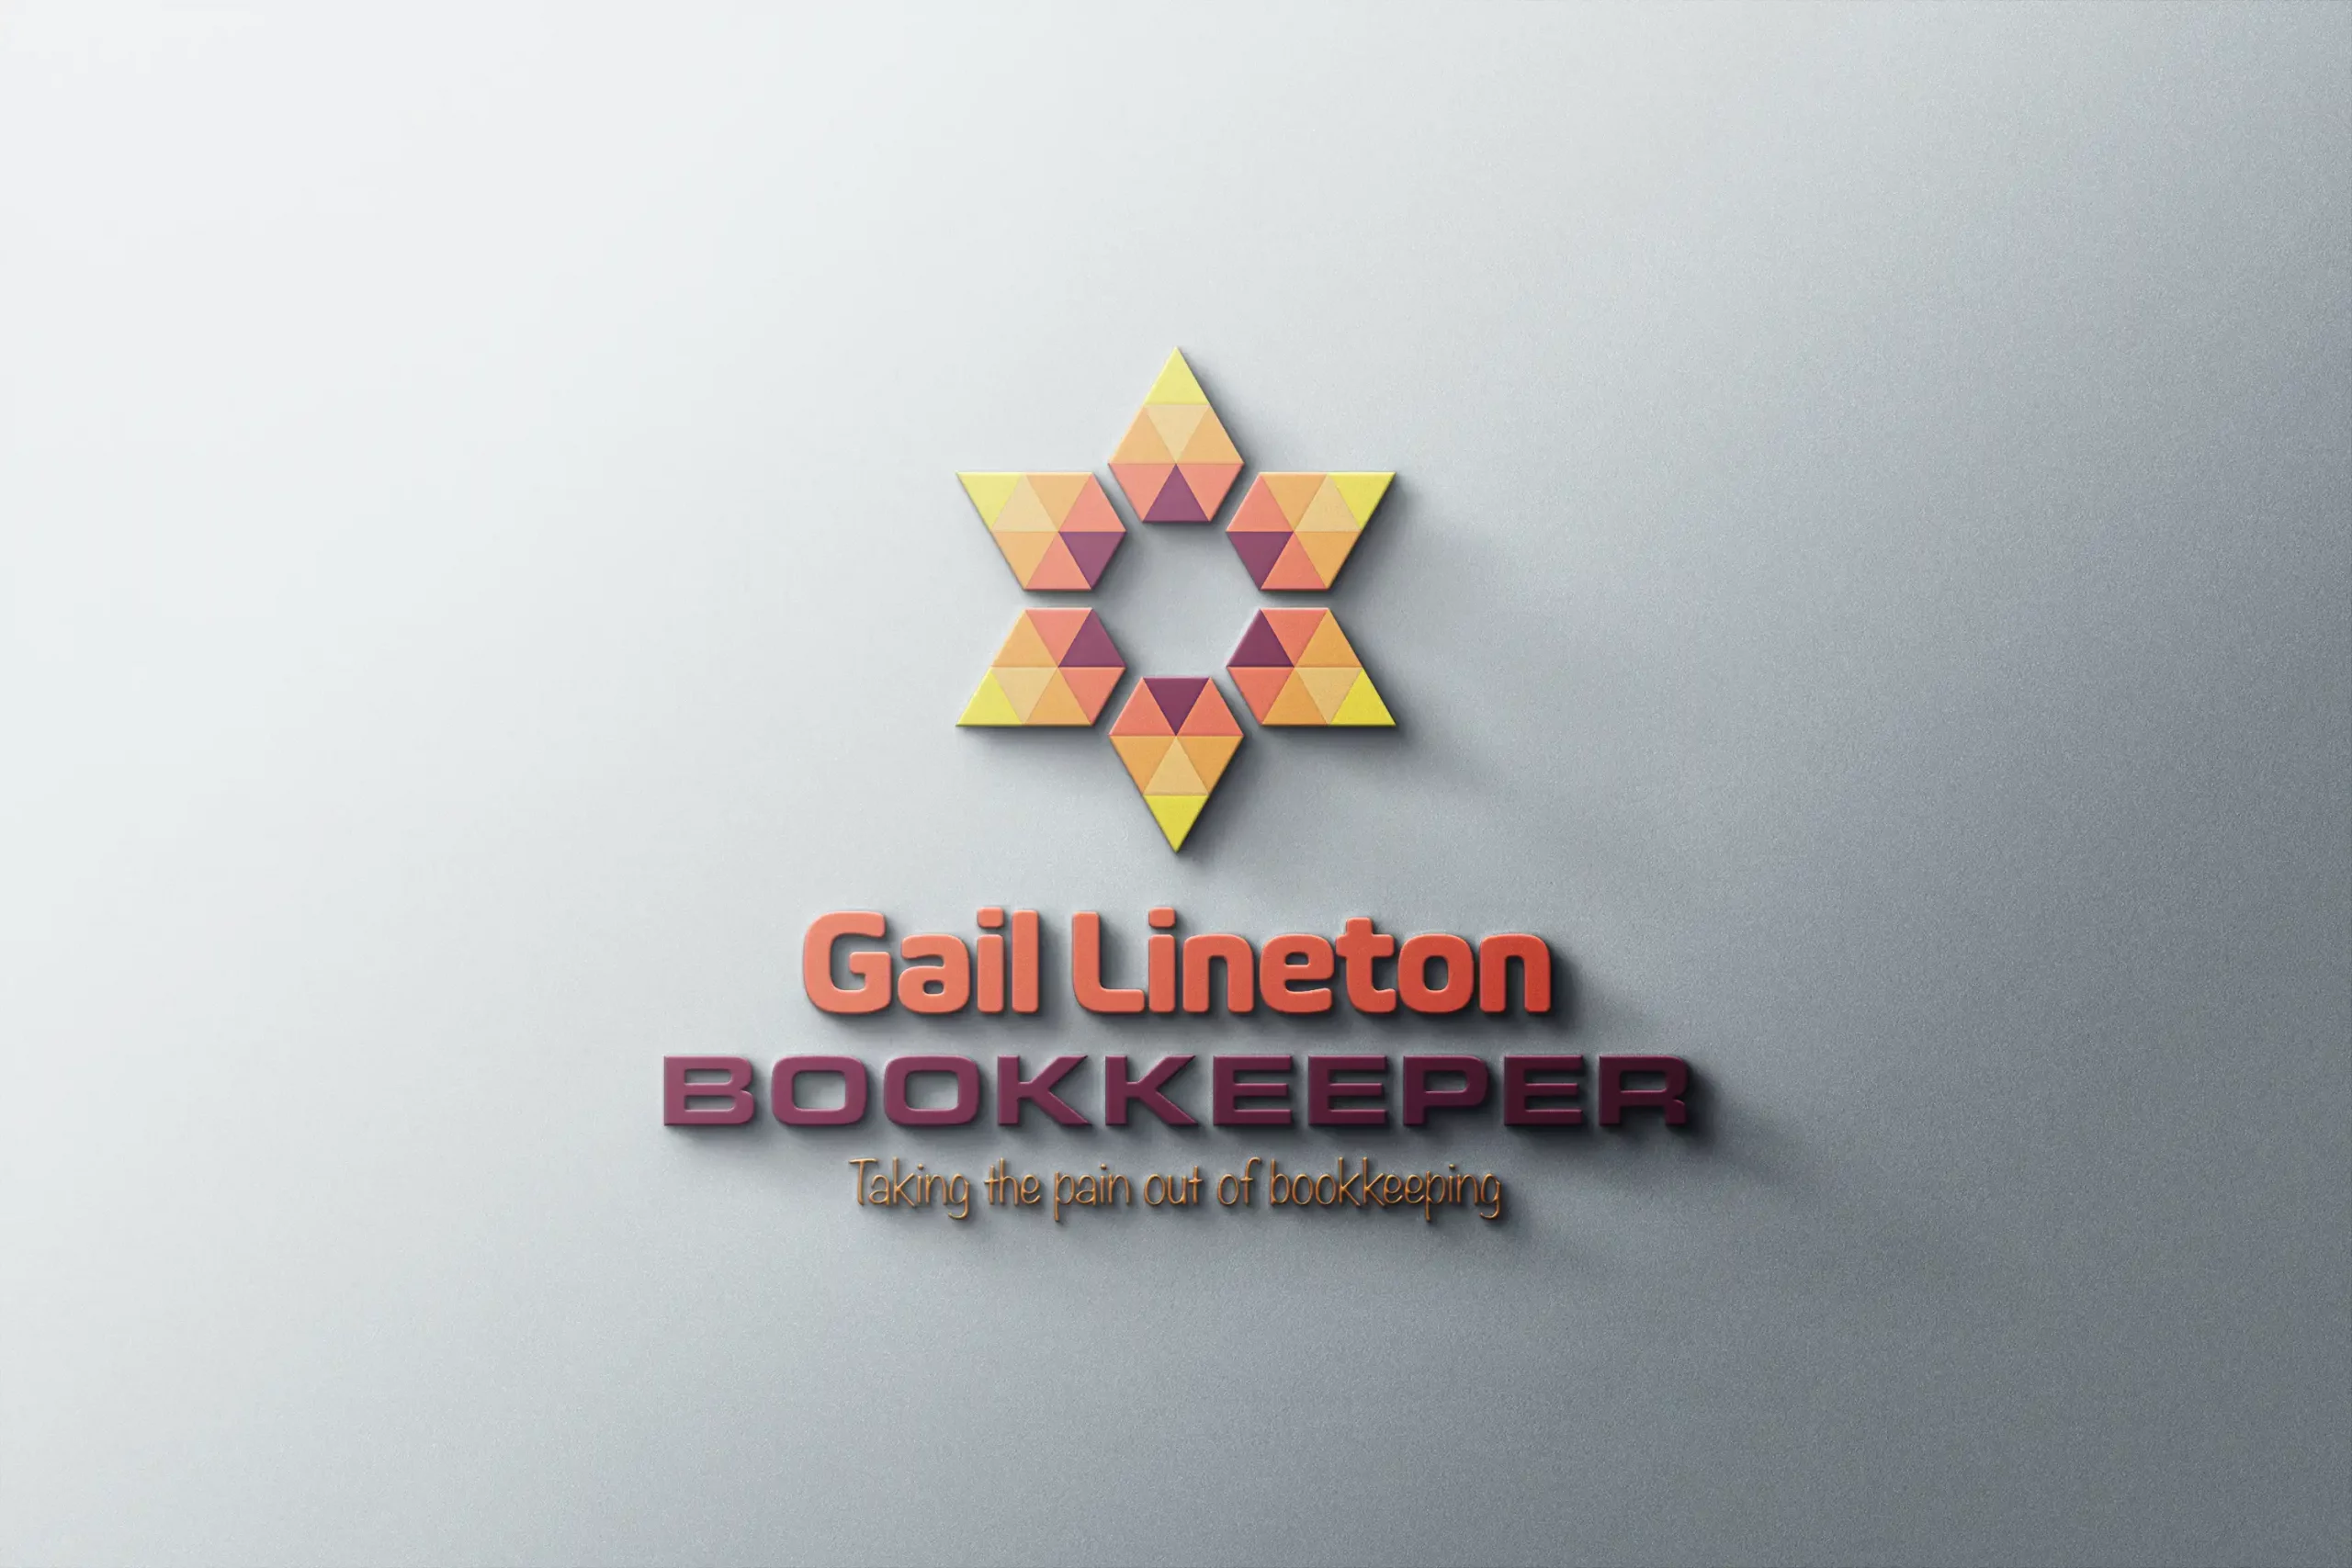 Logo Making made easy for Gail Lineton Bookkeeping in Rolleston, Selwyn, Christchucrh, Canterbury, NZ. A fun local business friendly geometrically styled Logo Design made by XDC.NZ, the super experienced, professional, Logo Designer or Logo Maker based in Christchurch & Rolleston